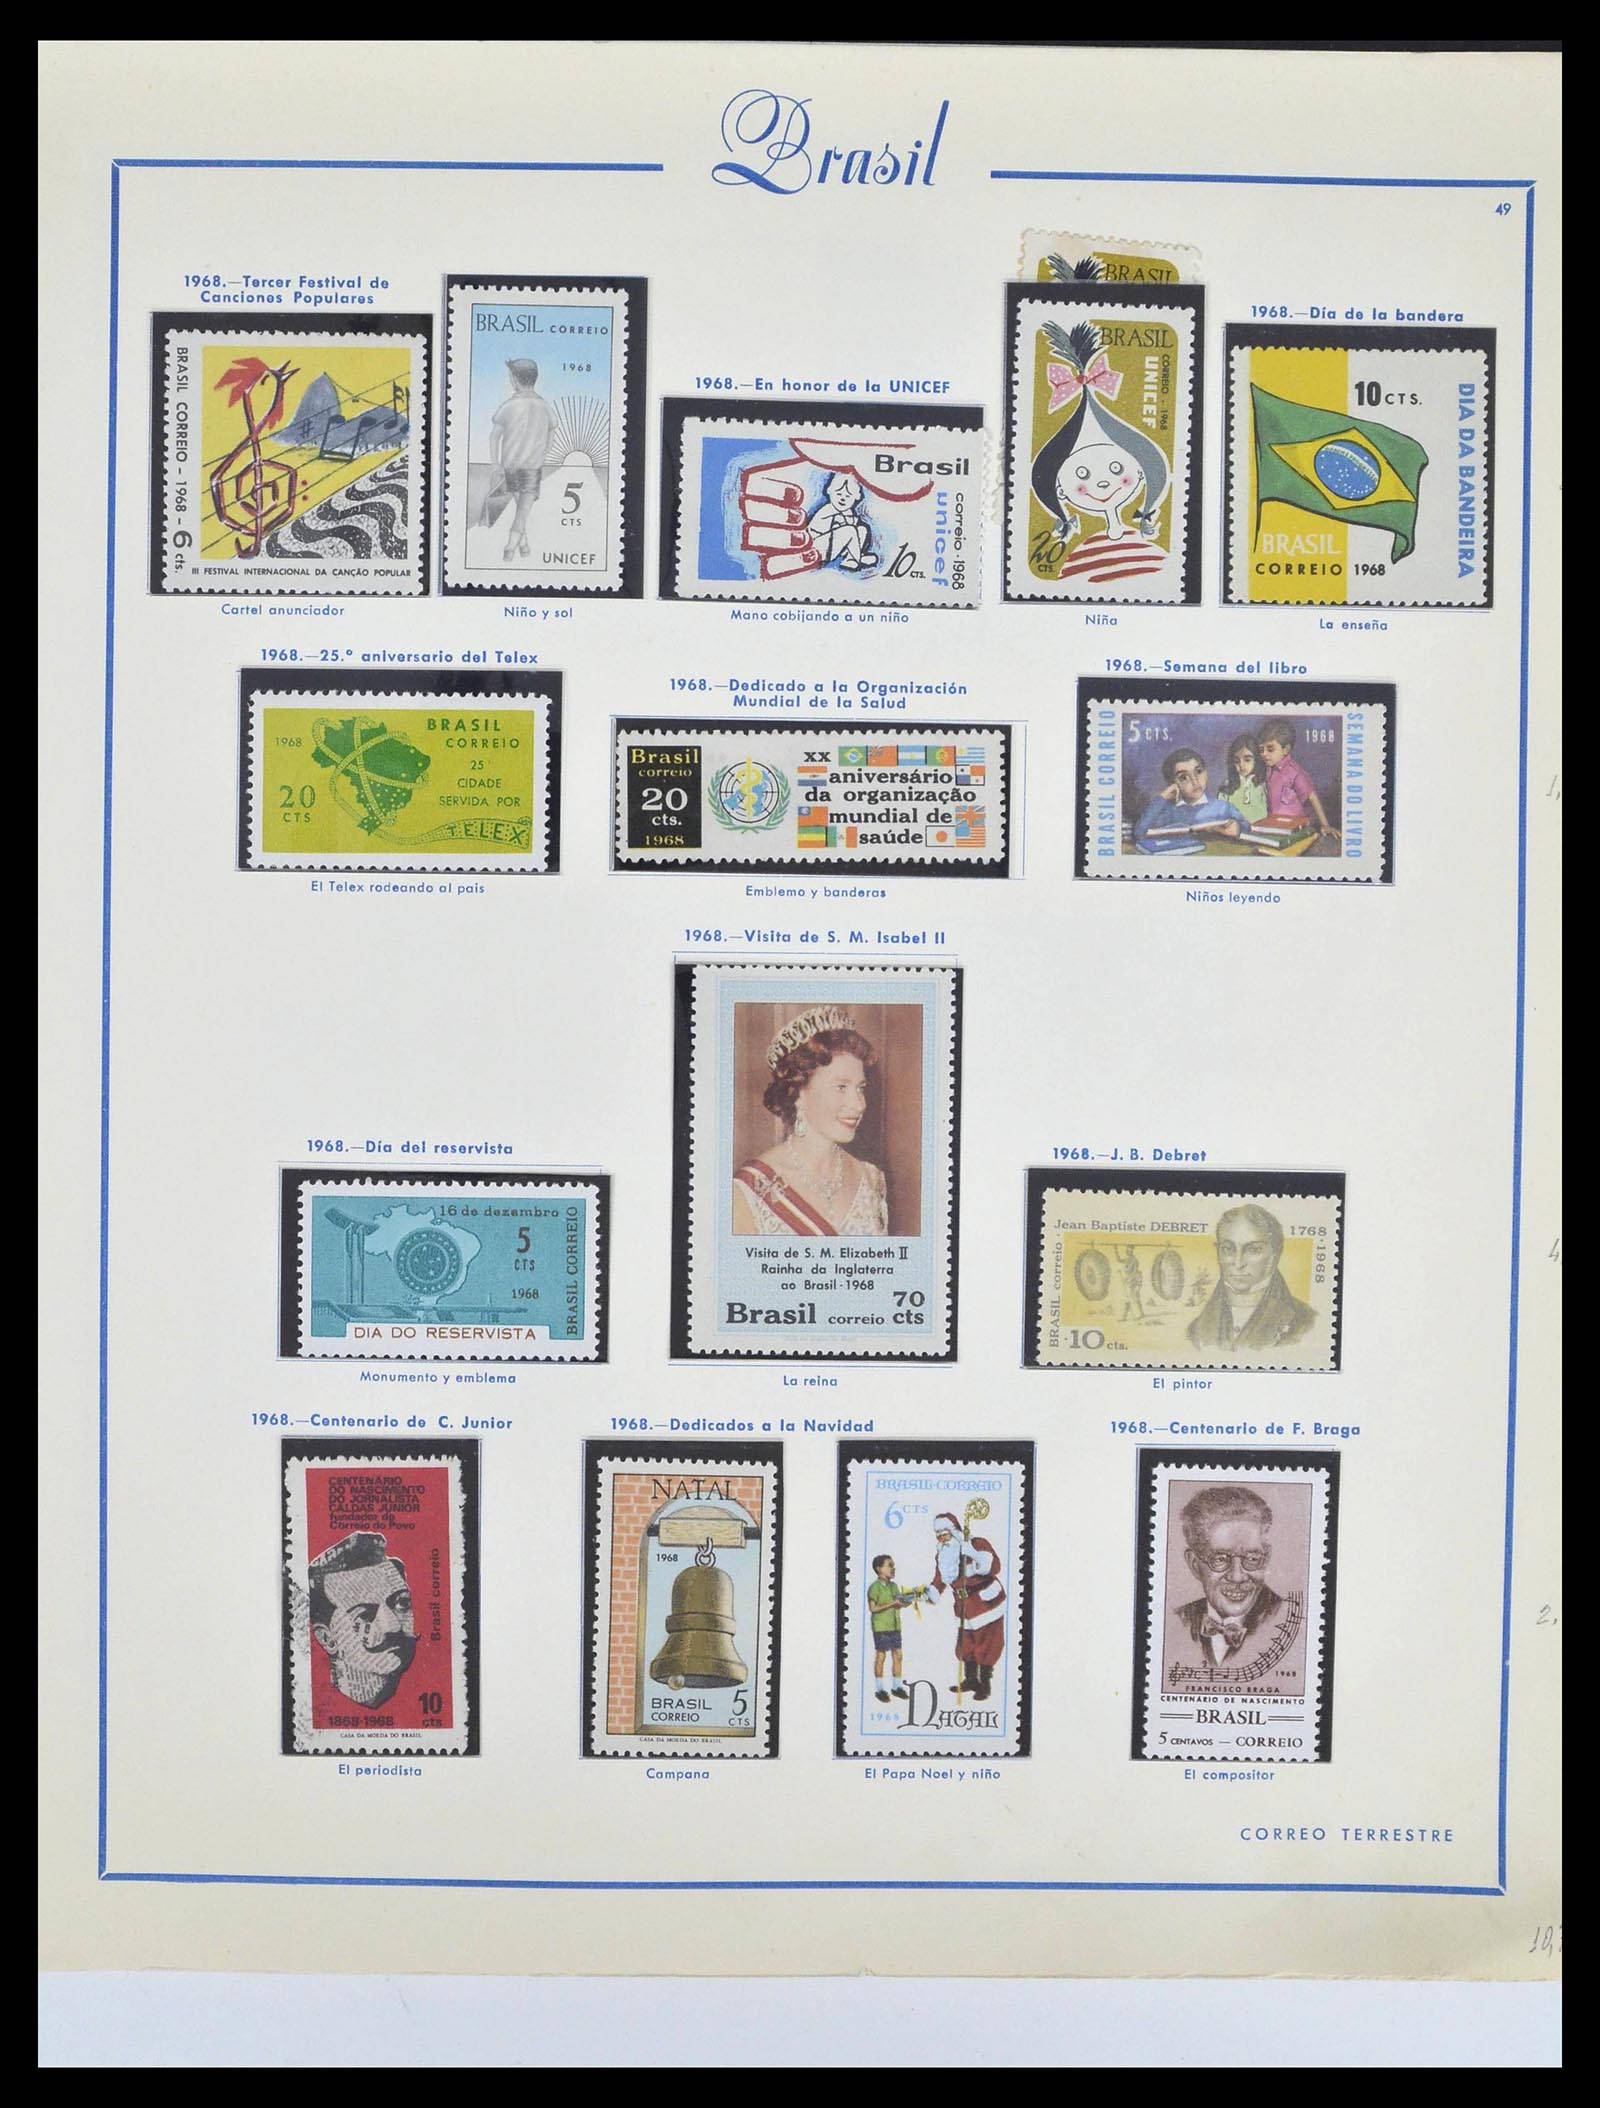 39245 0066 - Stamp collection 39245 Brazil 1843-1968.